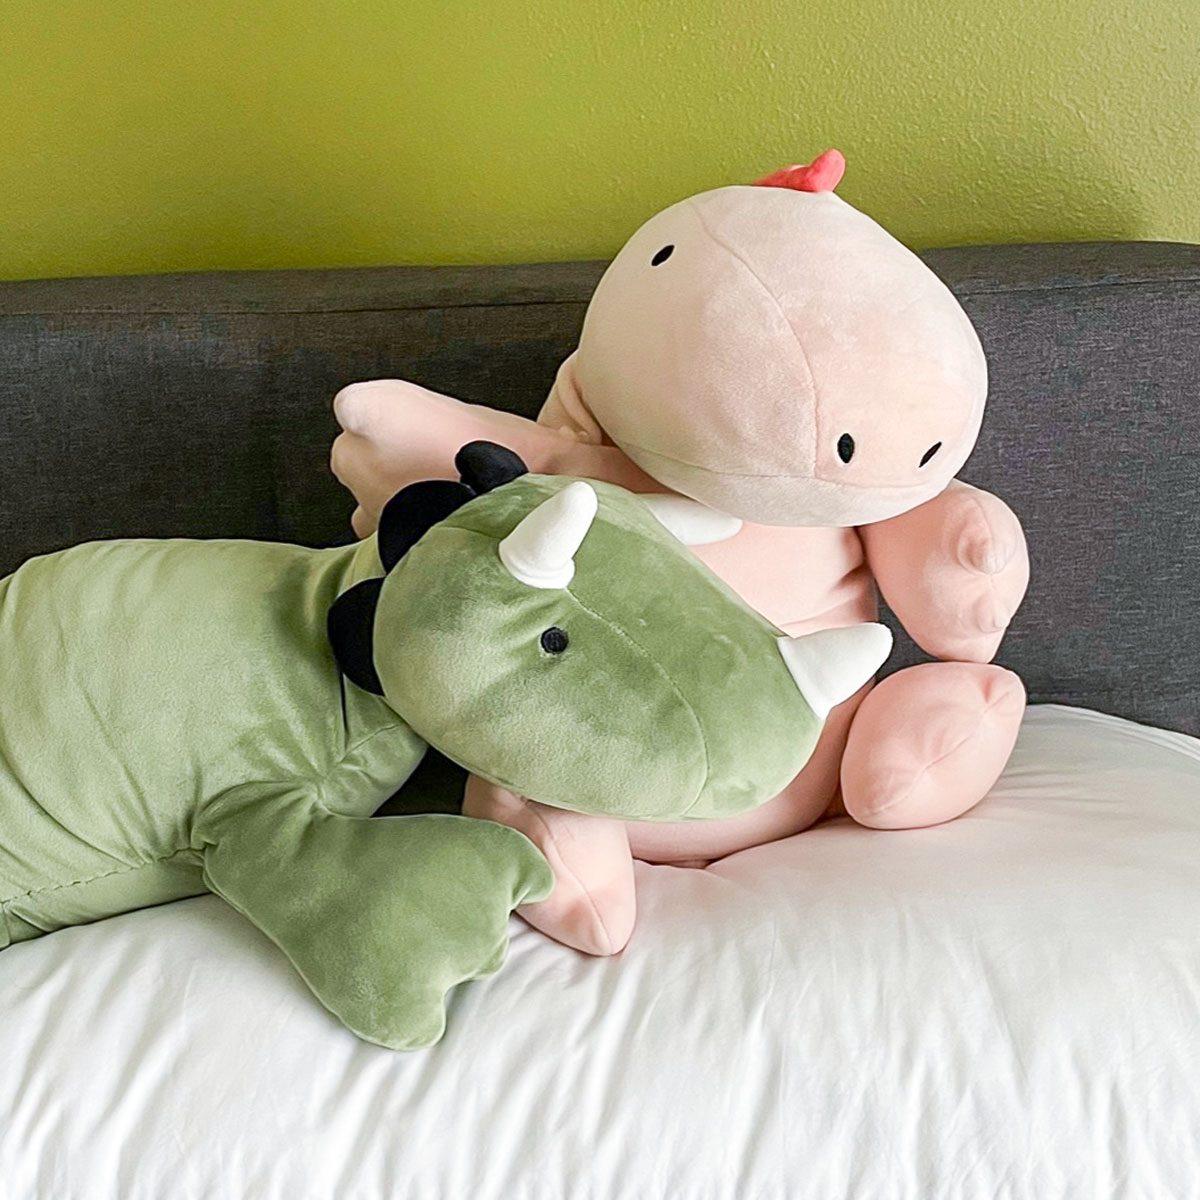 15 Dinosaur Weighted Plush, Weighted Stuffed Animals Plush, Weighted Plush  Series, Dinosaur Weighted Anxiety Plushie Dino Pillows